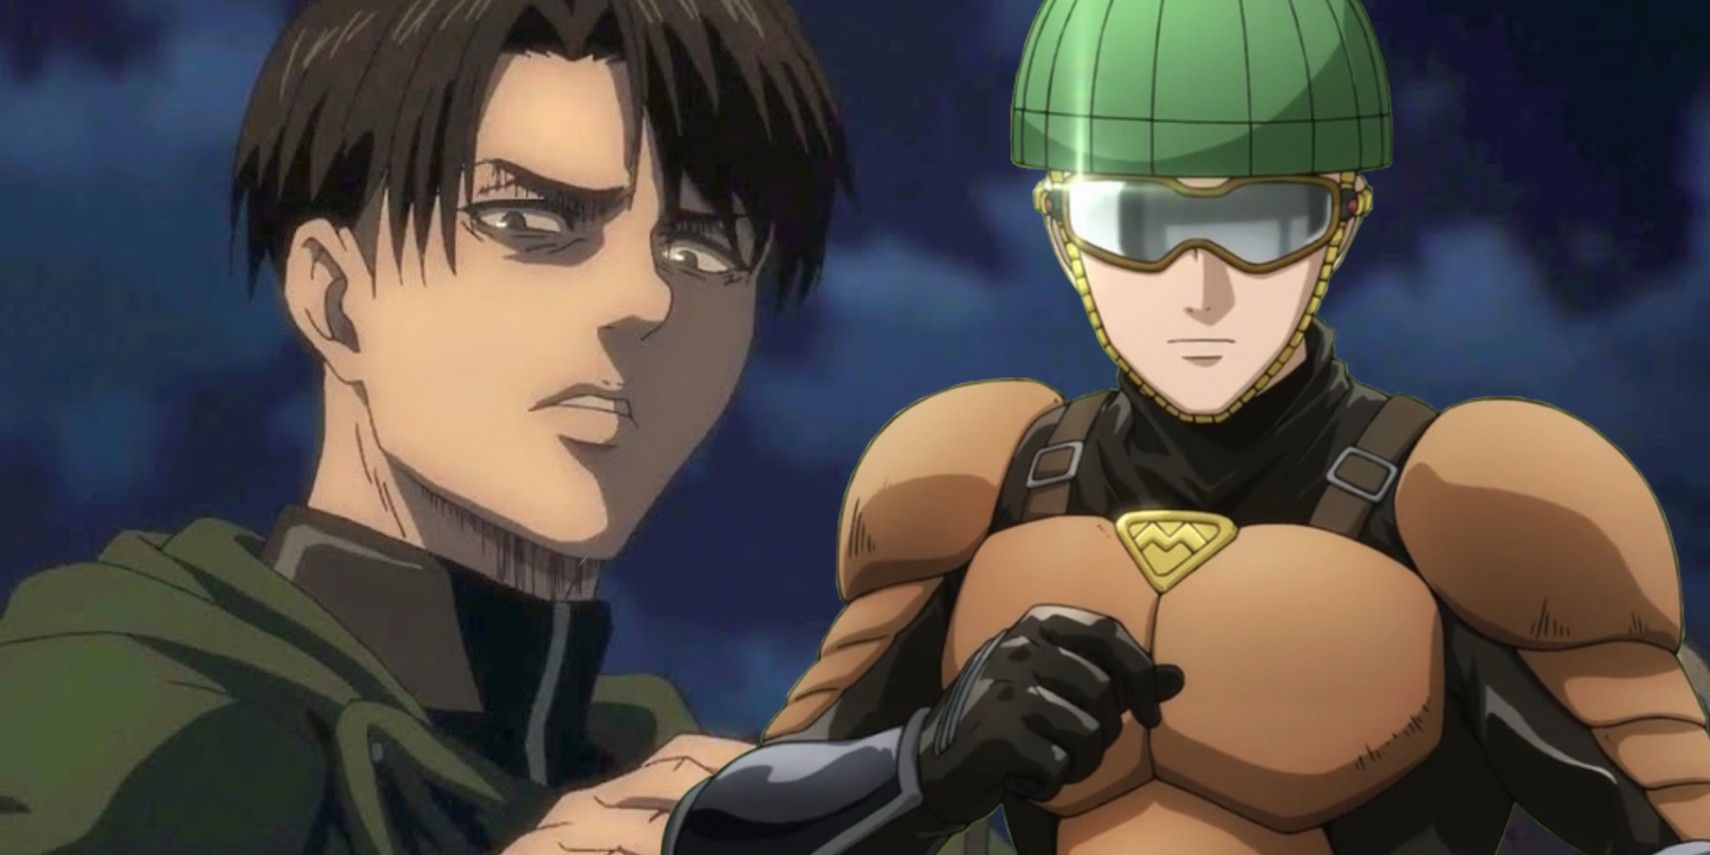 10 Strongest Human Characters In Anime, Ranked